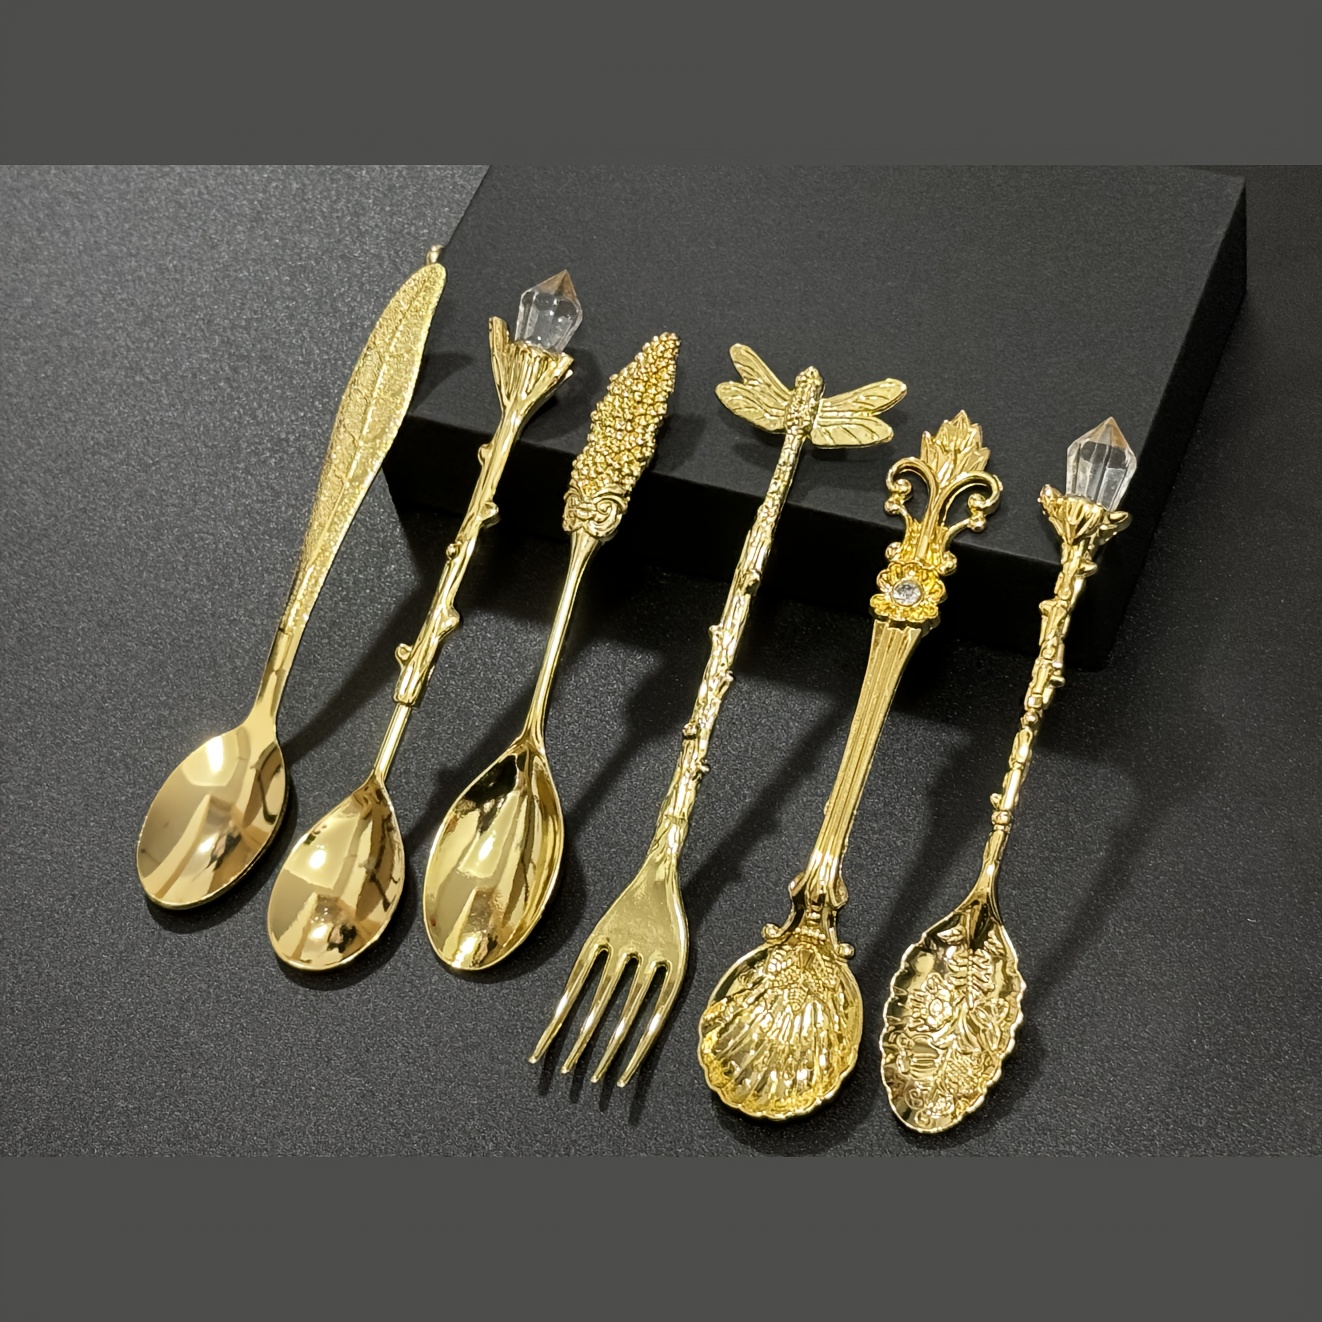 

6pcs, Exquisite Small Spoon Fork Set, Vintage Teaspoon, Fruit Fork, Coffee Stirring Spoon, For Home Restaurant Coffee Shop Party, Flatware